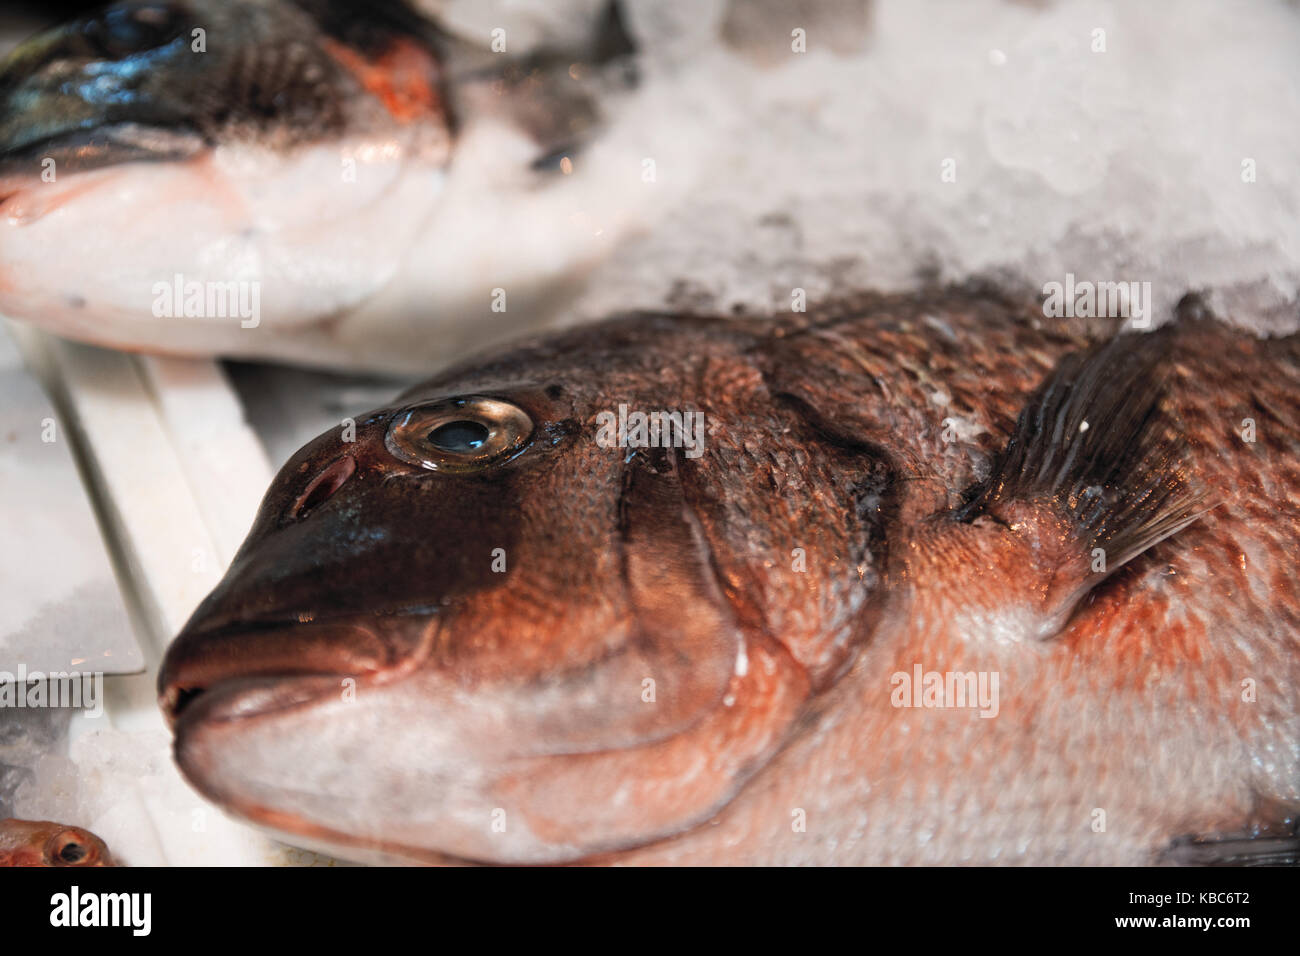 Close-Up Of Freshly Caught Red Porgy Or Pagrus Pagrus On Ice For Sale In The Greek Fish Market Stock Photo